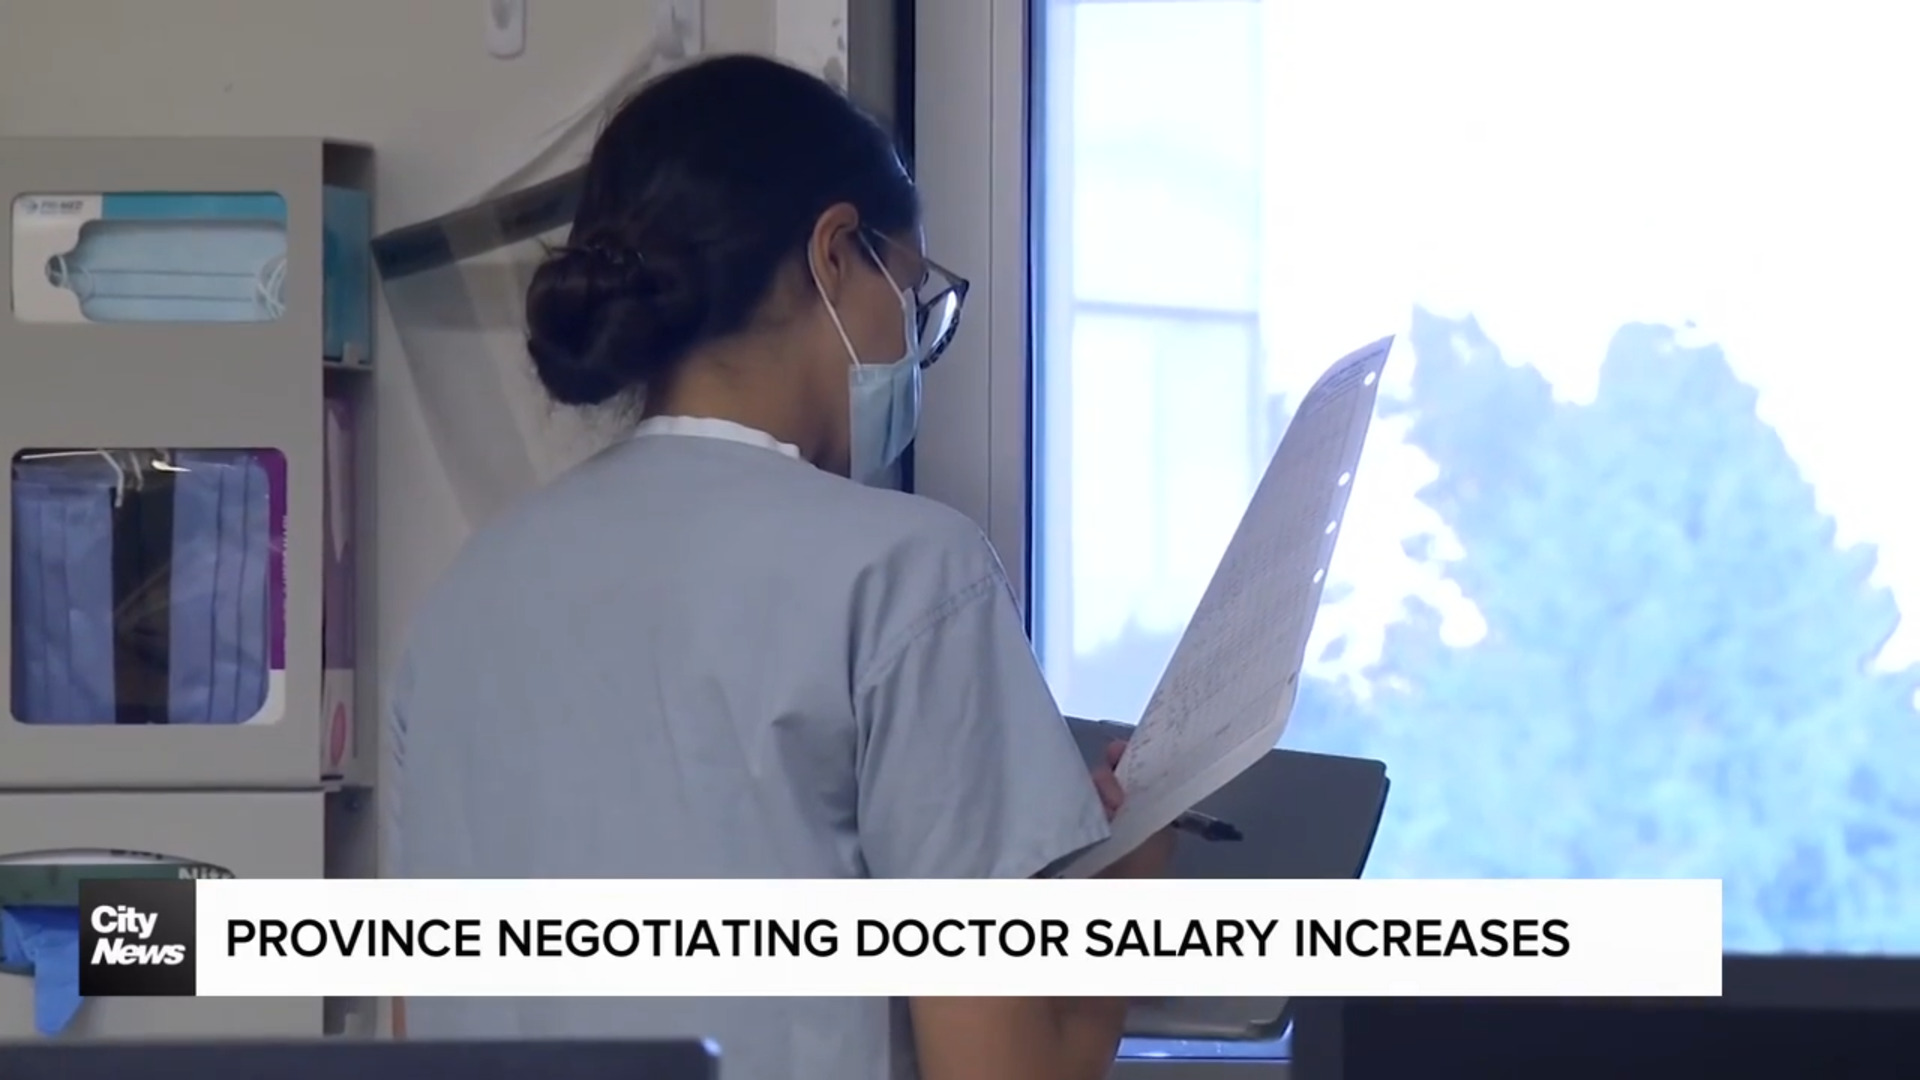 Ontario negotiating doctor salary increases amid reported family doctor shortage